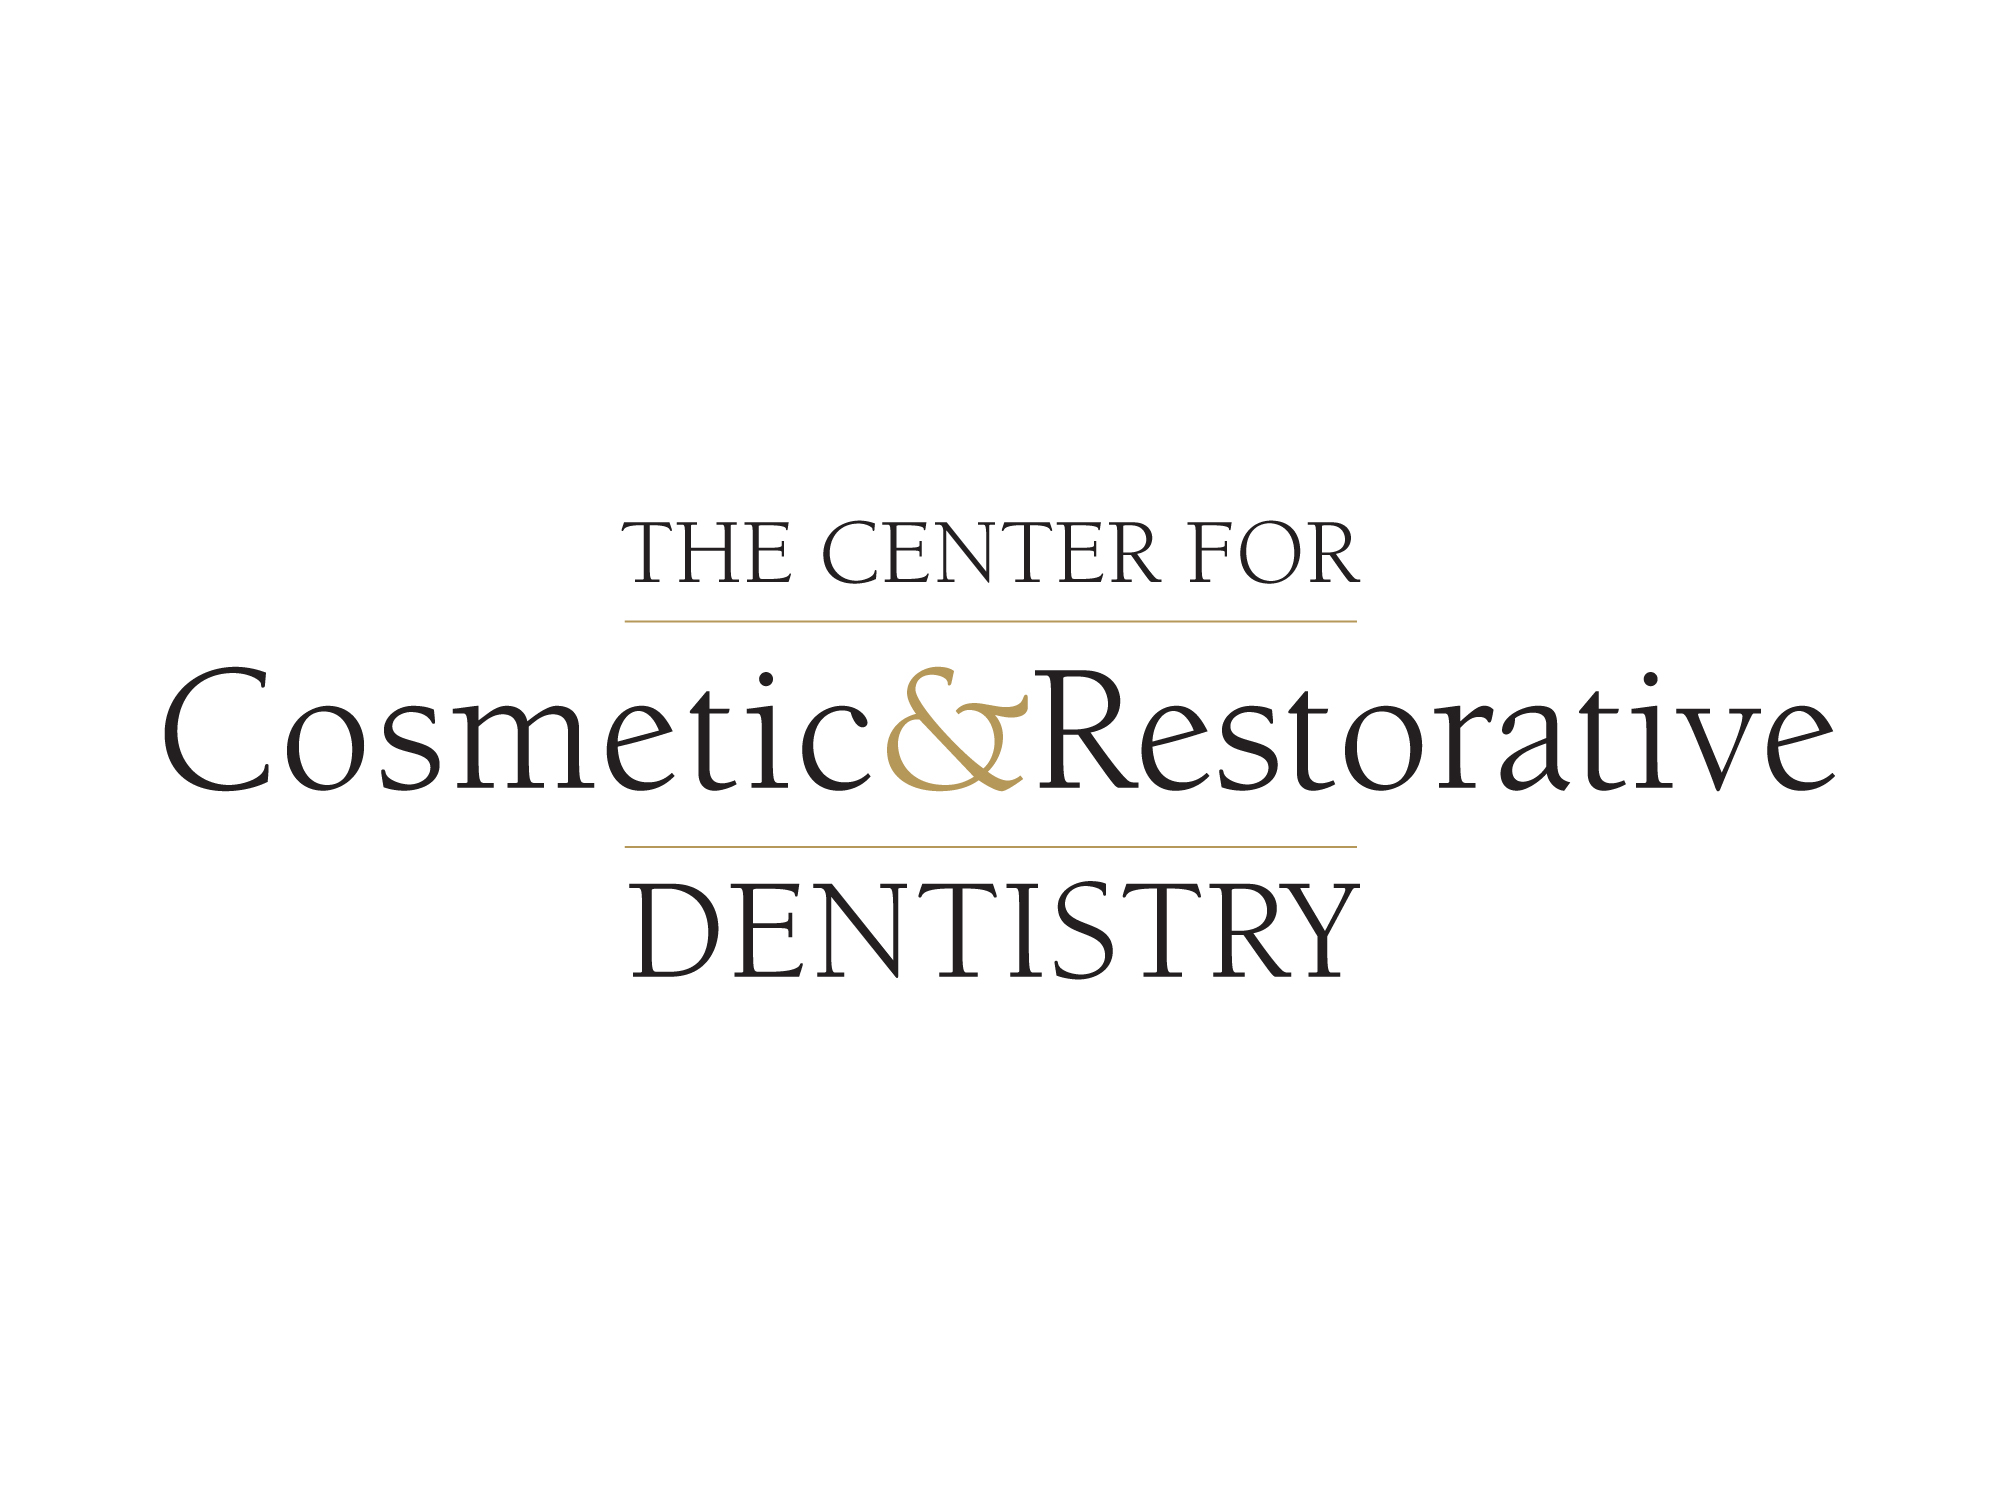 The Center for Cosmetic and Restorative Dentistry, Tanya Brown, DMD, 2011.